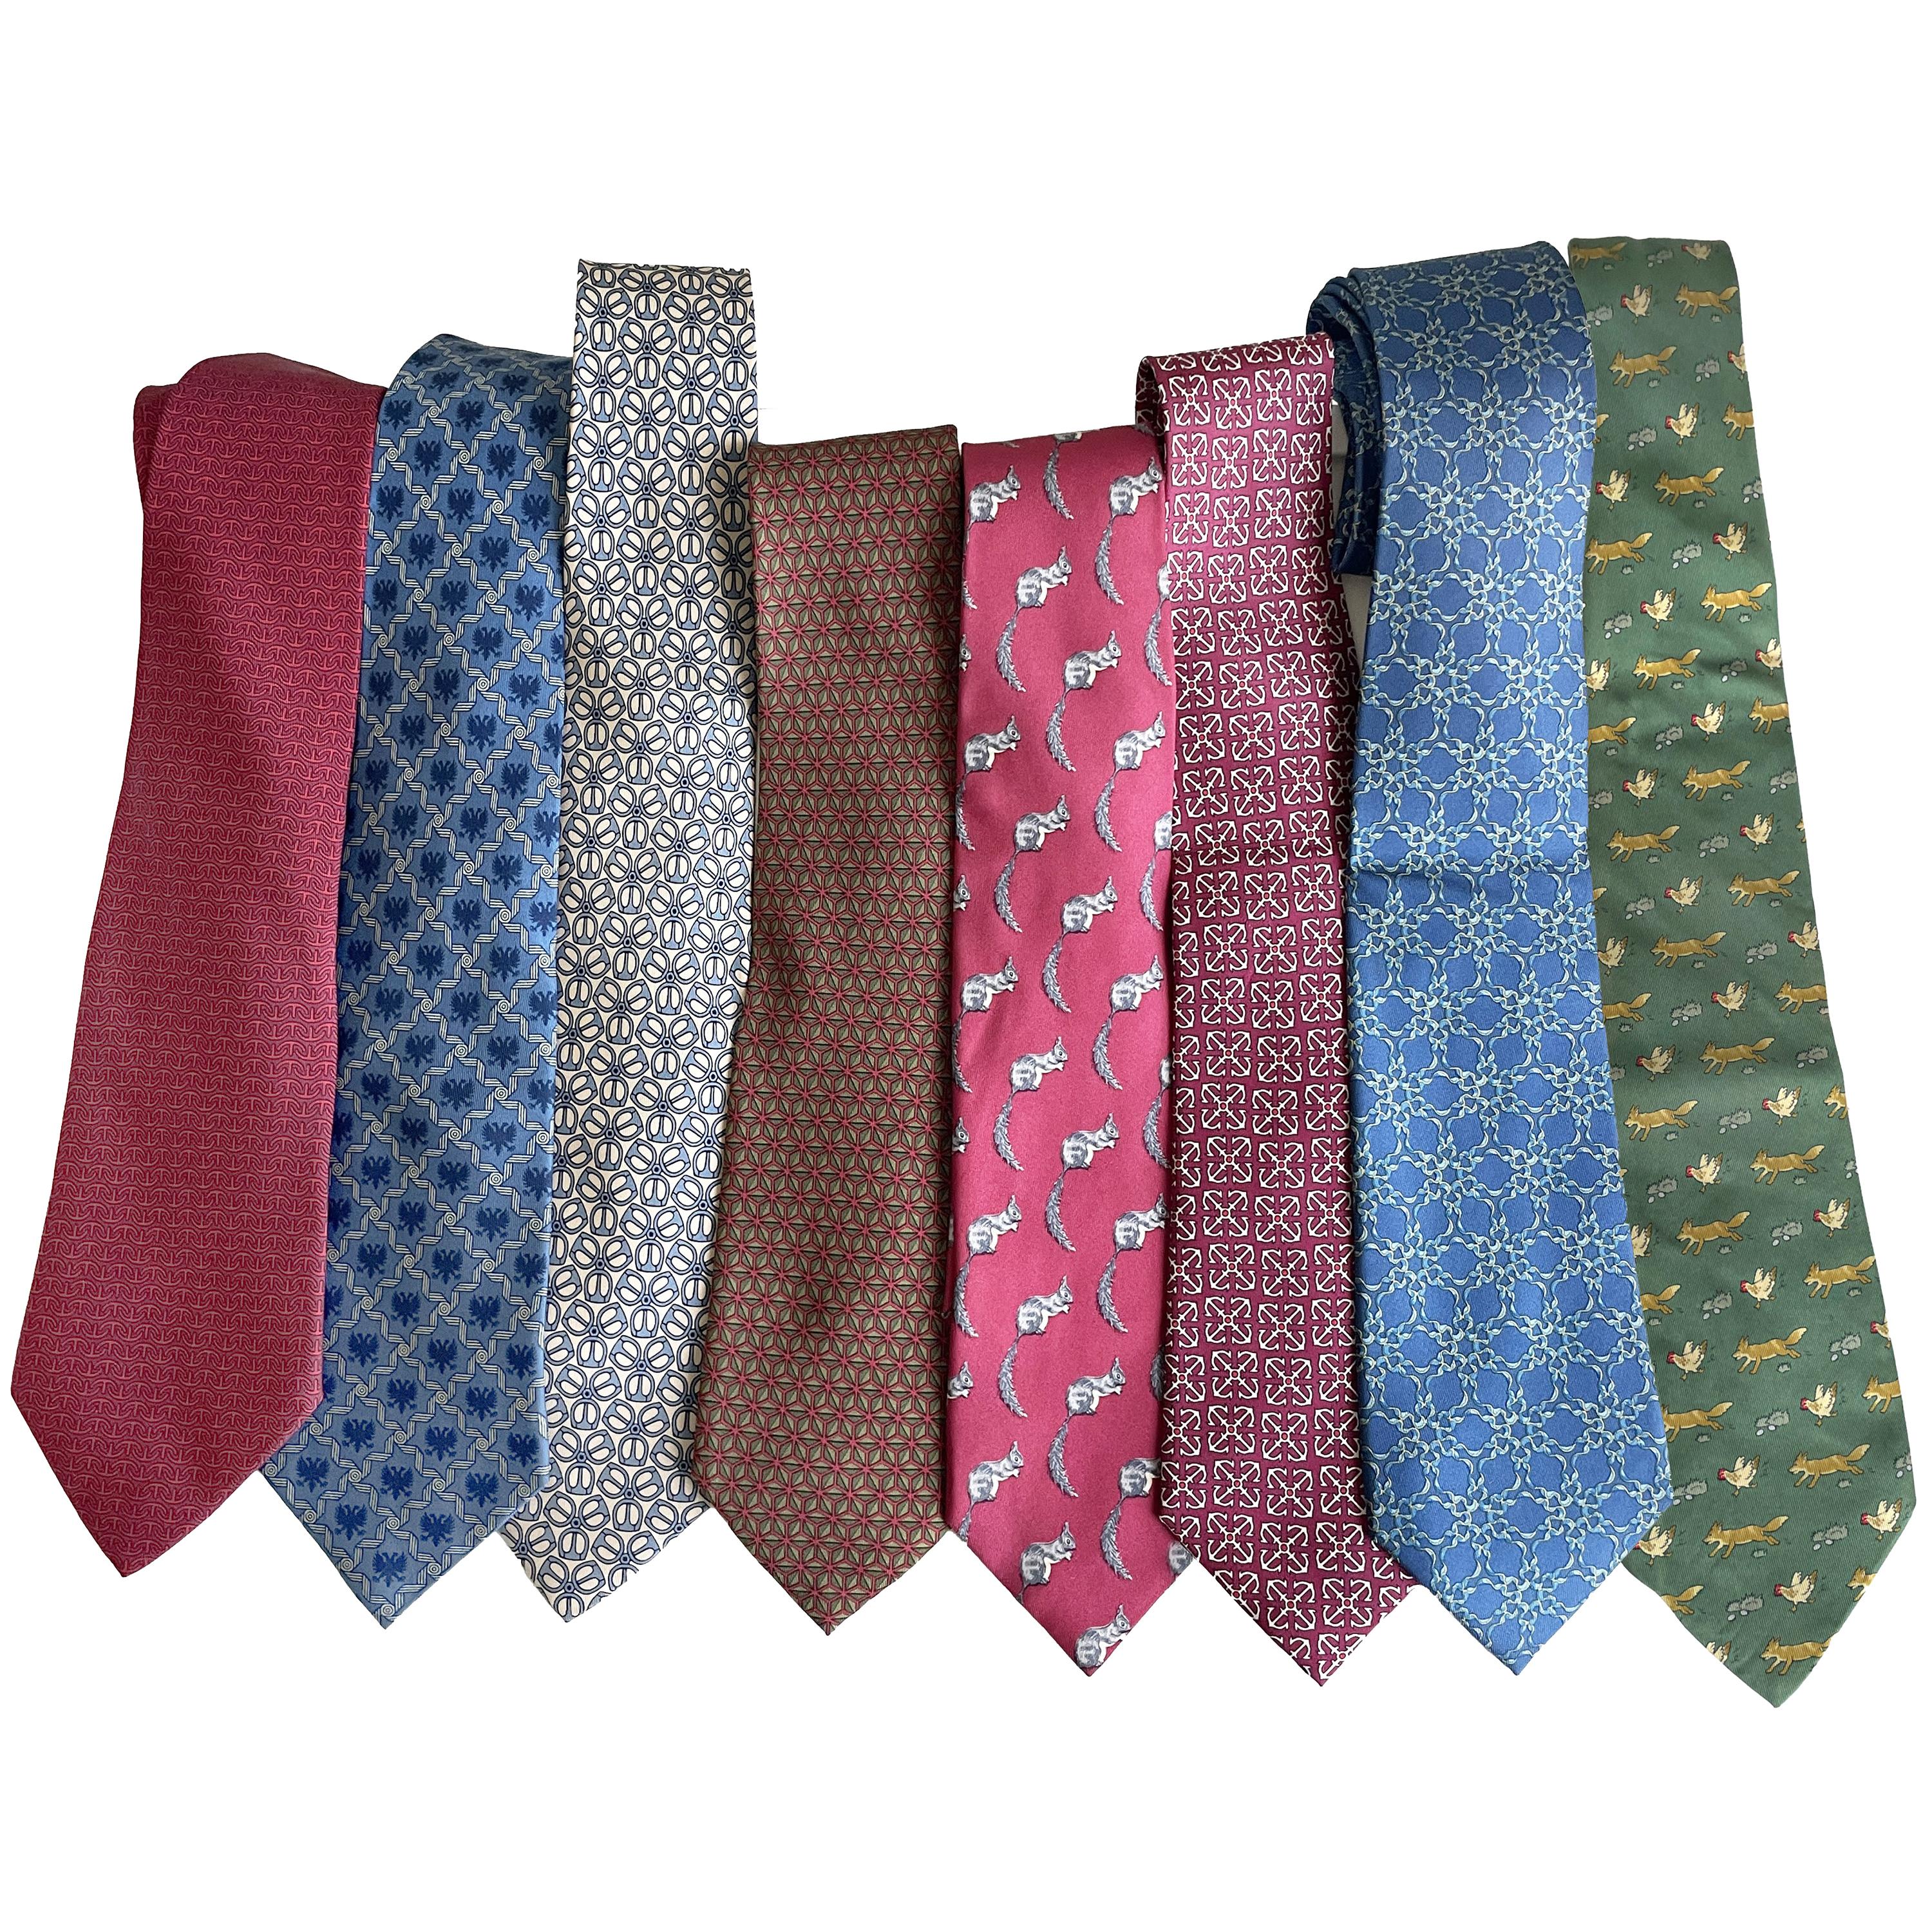 Authentic, preowned, vintage Hermes Neckties, lot of 34 mens neckties.  All were made by Hermes Paris, all are 100% silk.  

Perfect for those who enjoy luxury accessories for work, play or for those of you who collect!  Some of these ties feature